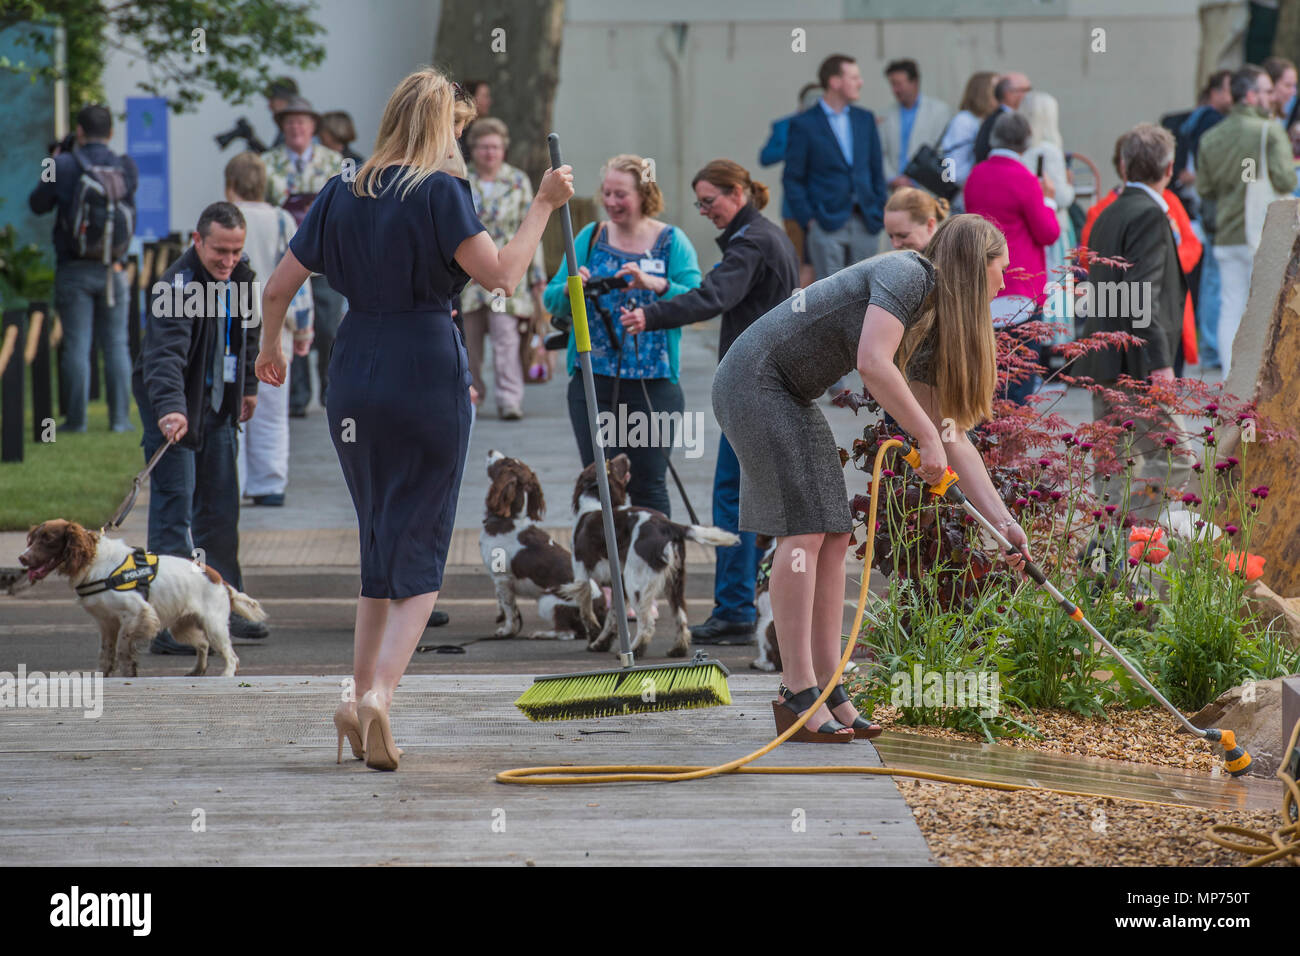 London, UK. 21st May 2018. Final preparations on the Marshalls stand as sniffer dogs look on - Press day at The RHS Chelsea Flower Show at the Royal Hospital, Chelsea. Credit: Guy Bell/Alamy Live News Stock Photo